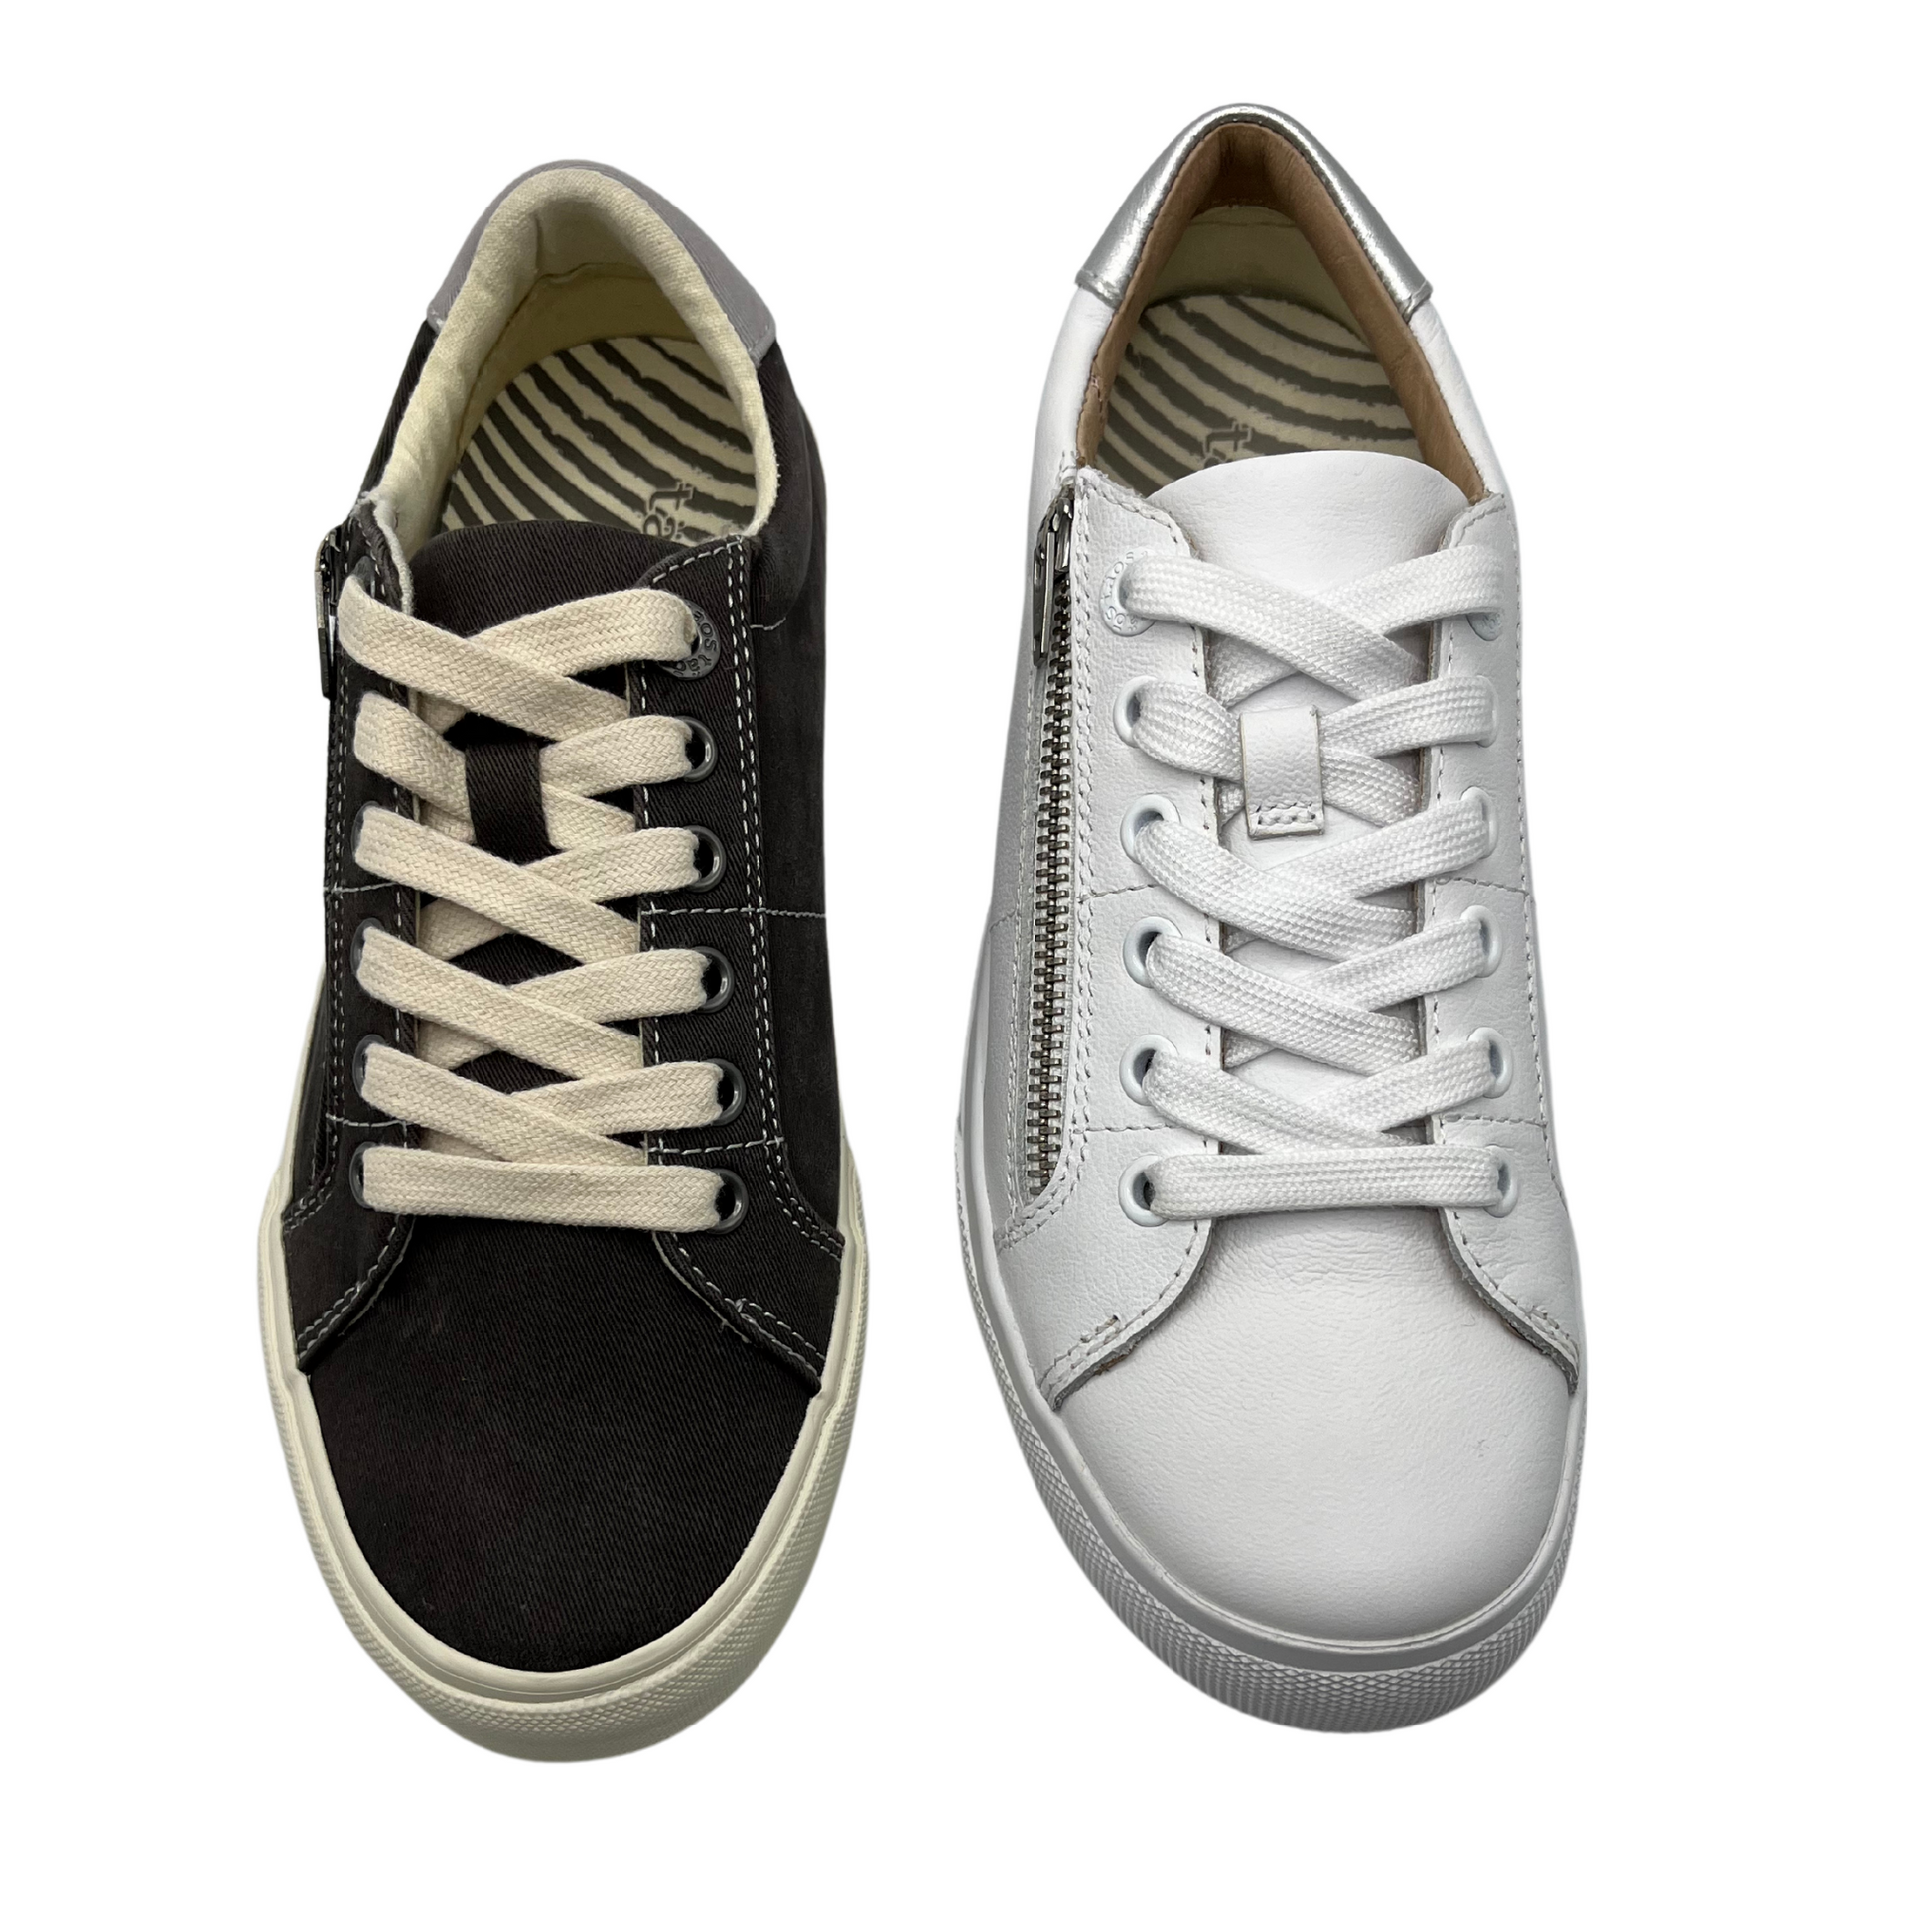 Top view of two sneakers side by side. One is a graphite canvas and the other is white nubuck leather. Both have a side zipper closure and laces up the front